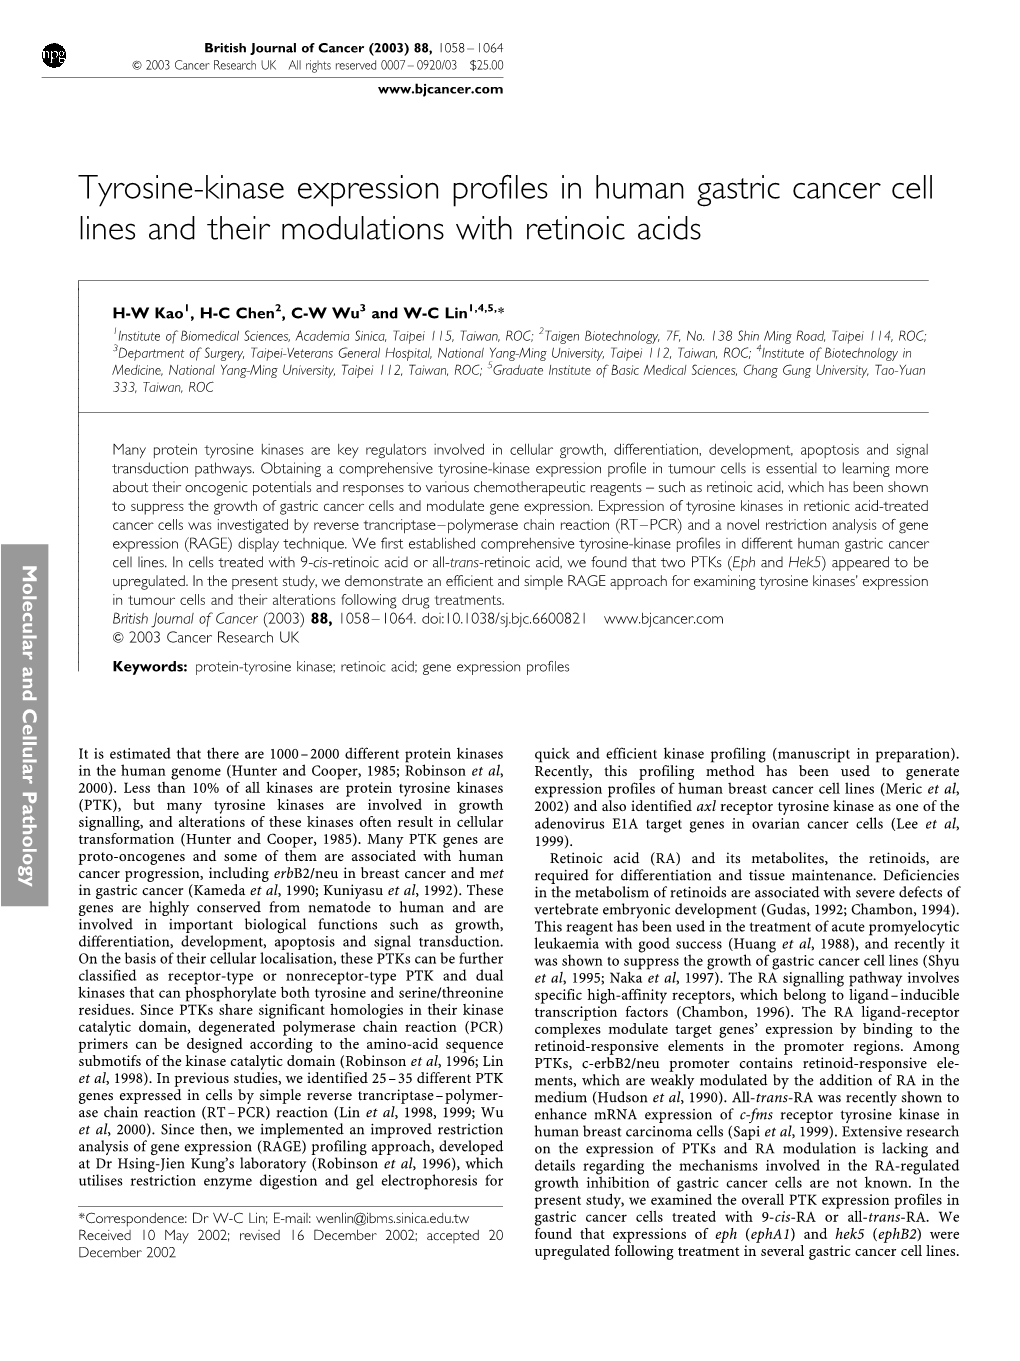 Tyrosine-Kinase Expression Profiles in Human Gastric Cancer Cell Lines and Their Modulations with Retinoic Acids